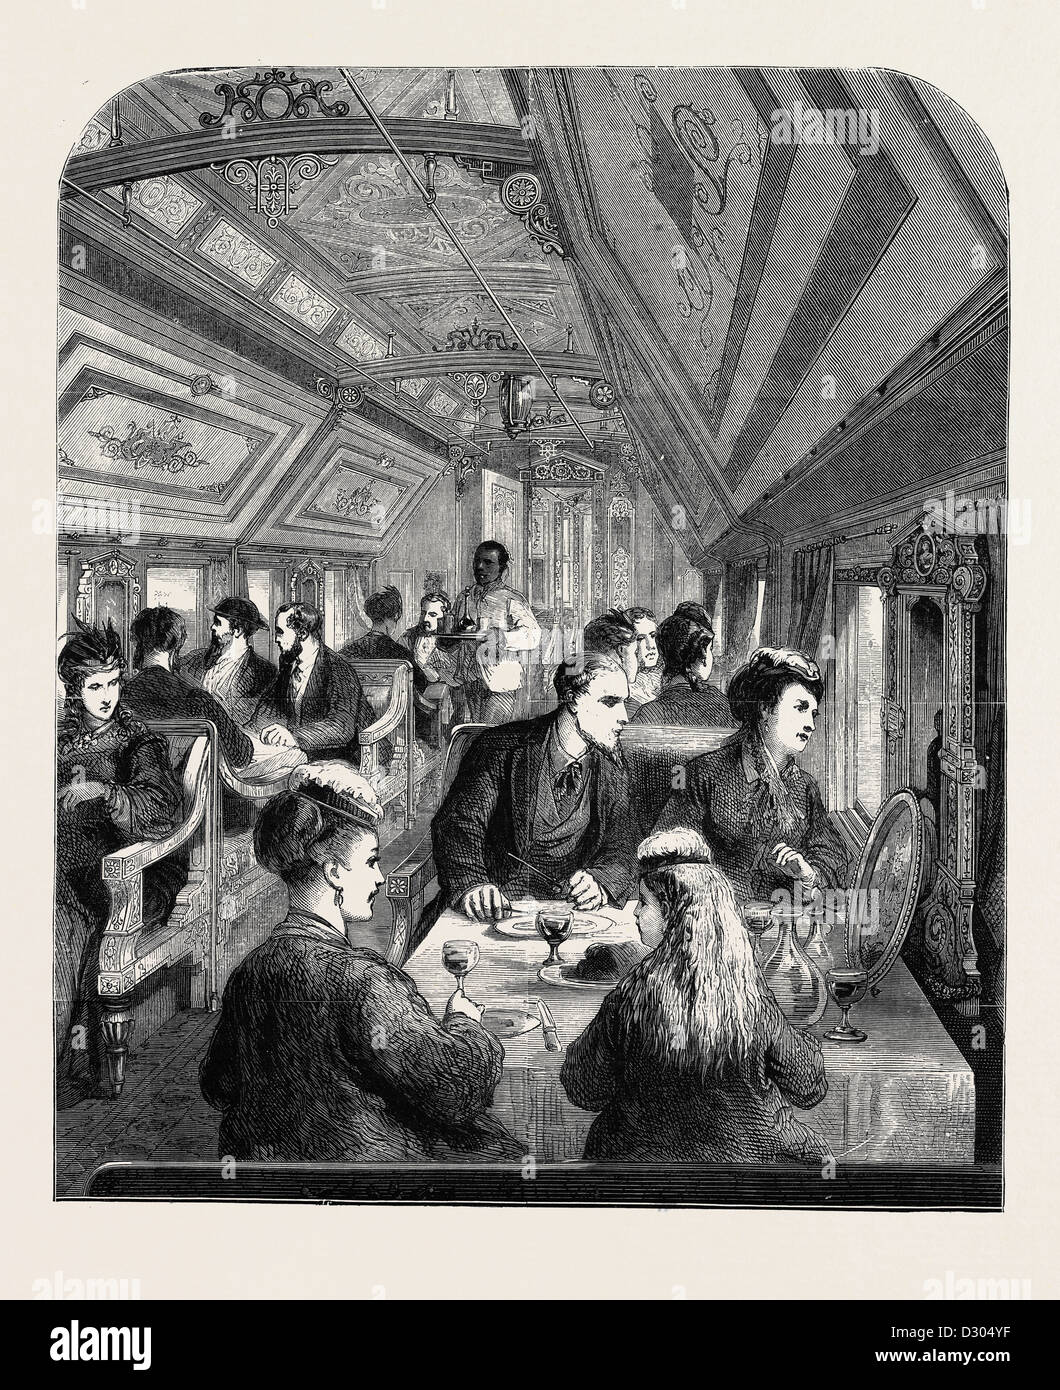 DINING CAR ON THE UNION PACIFIC RAILWAY, 1870 Stock Photo